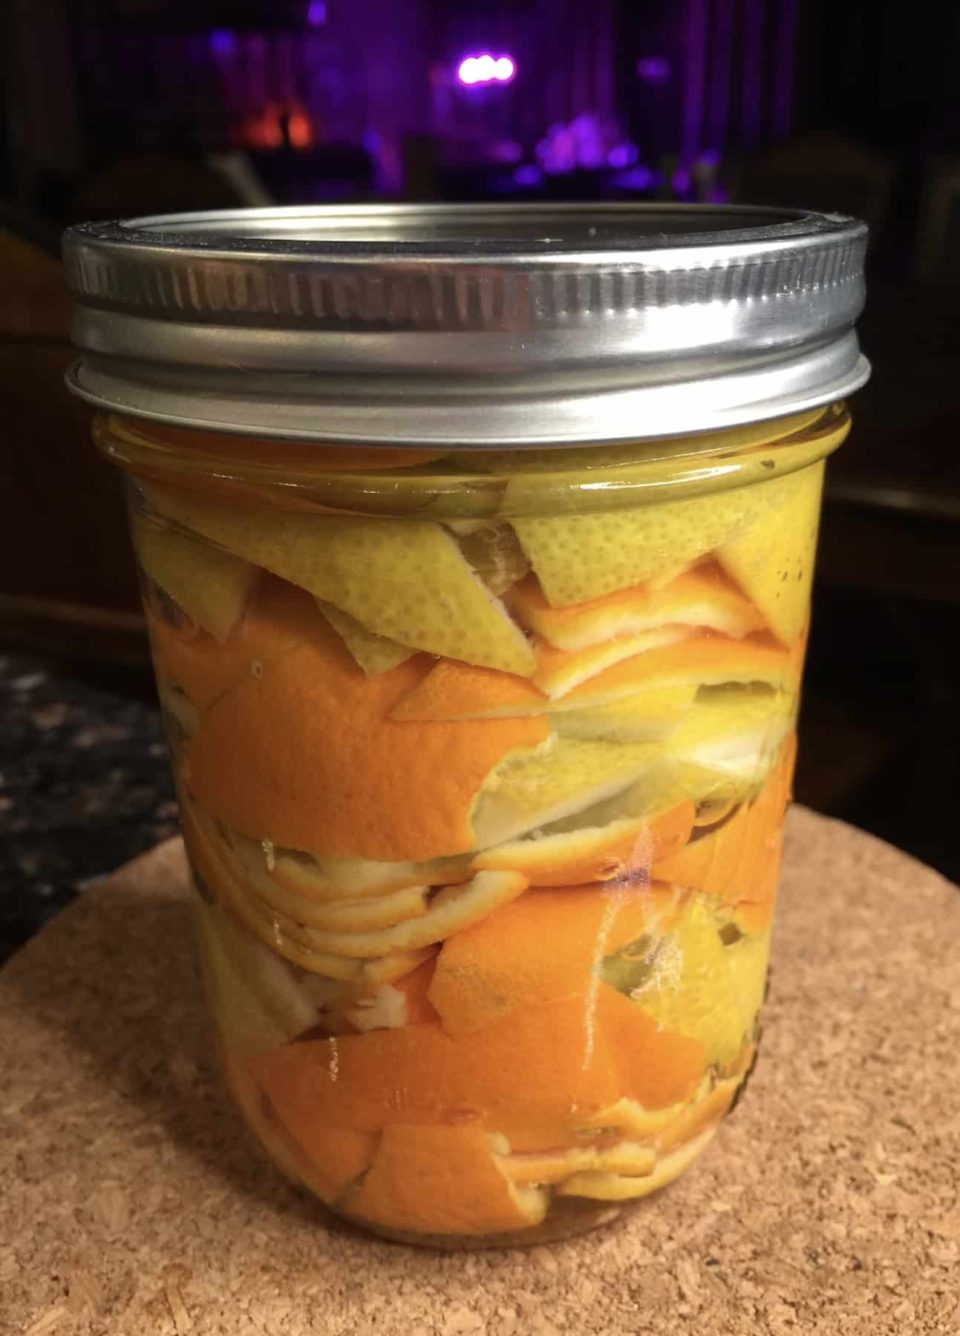 Citrus peels and vinegar sealed tightly in a jar.